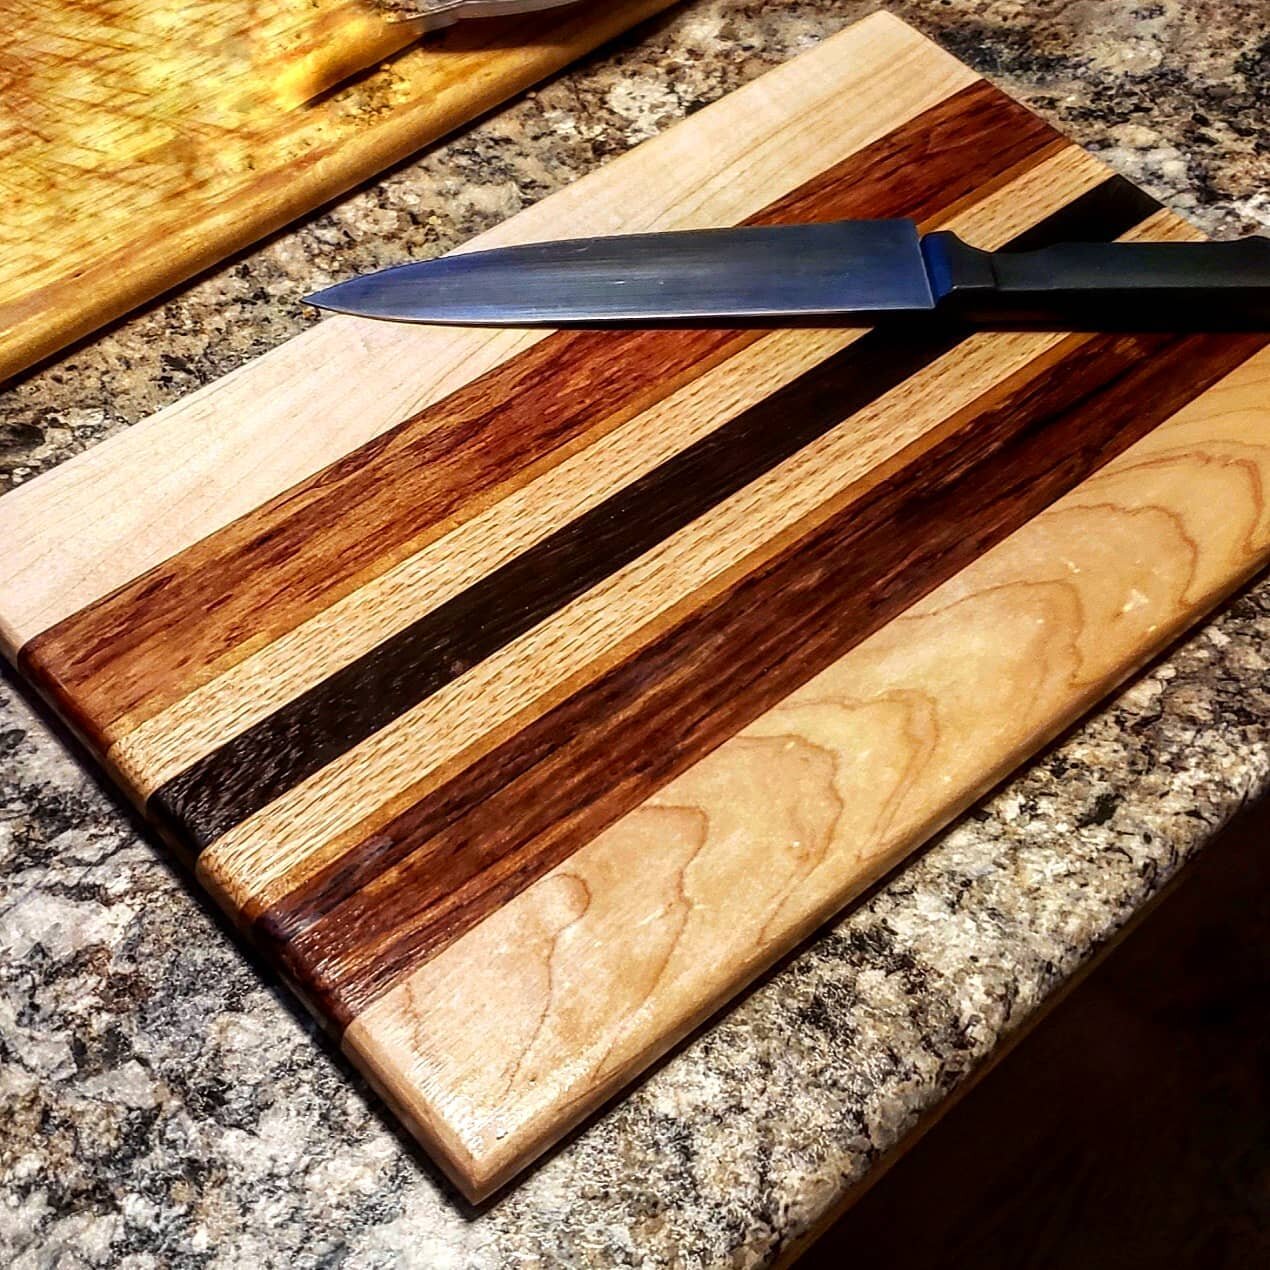 The grain on this cutting board really POPS! Cutting boards are so much fine to make. Order your own custom cutting board by searching @CoastalCraftCircuit on #Etsy!
.
.
.
.
#handmade #woodworking #cuttingboard #woodart #woodisgood #finewoodworking #